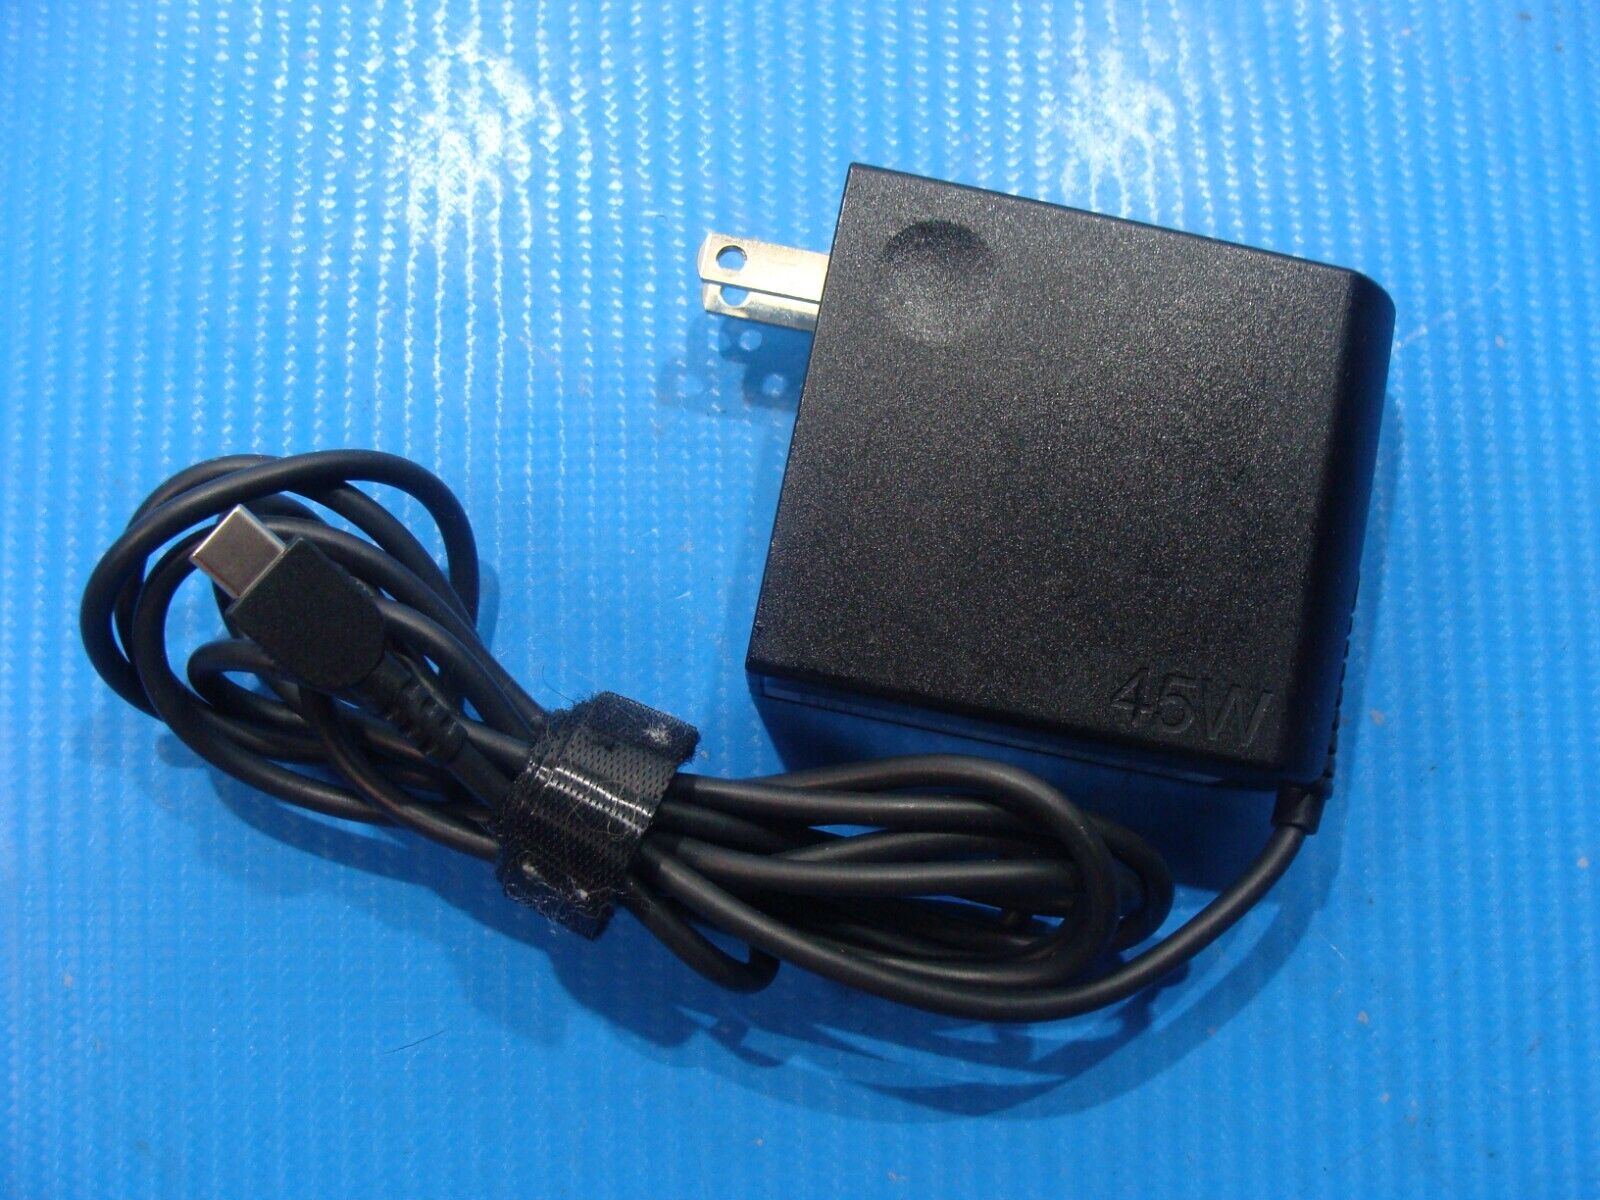 Genuine Charger for Lenovo Yoga 910 910-13 910-13IKB Power Supply Adapter Cord